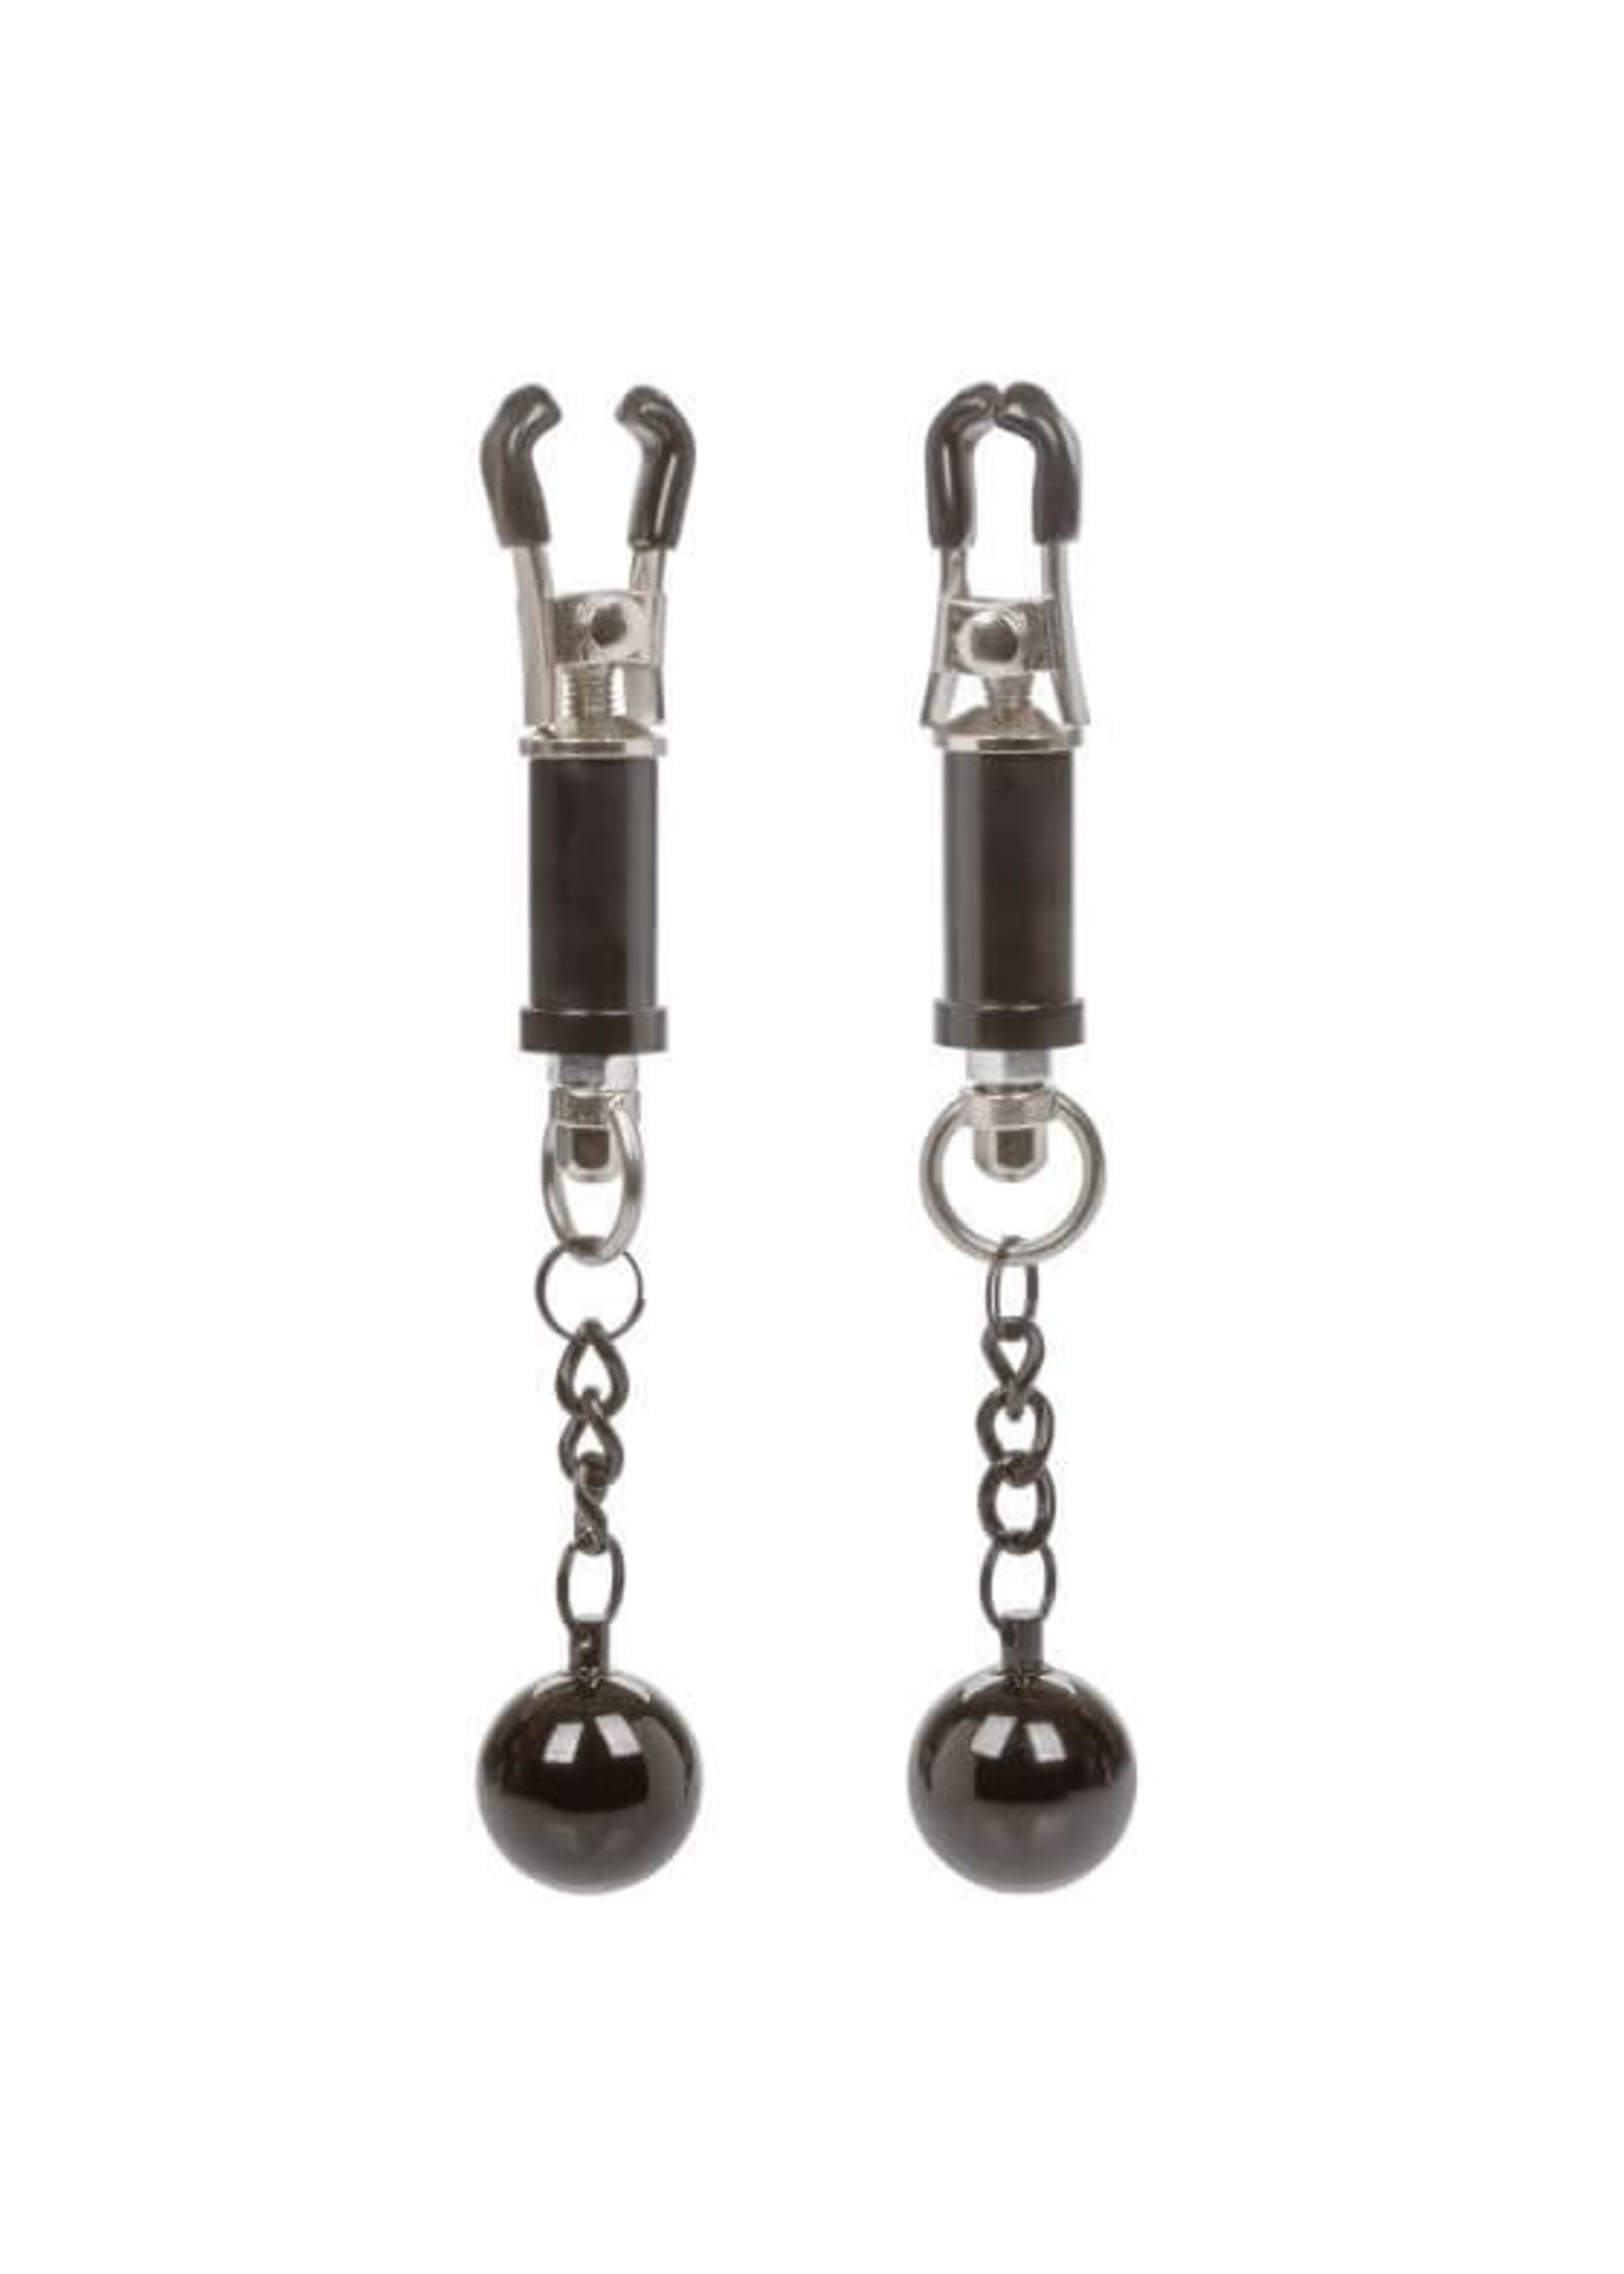 Nipple Grips Weighted Twist Nipple Clamps